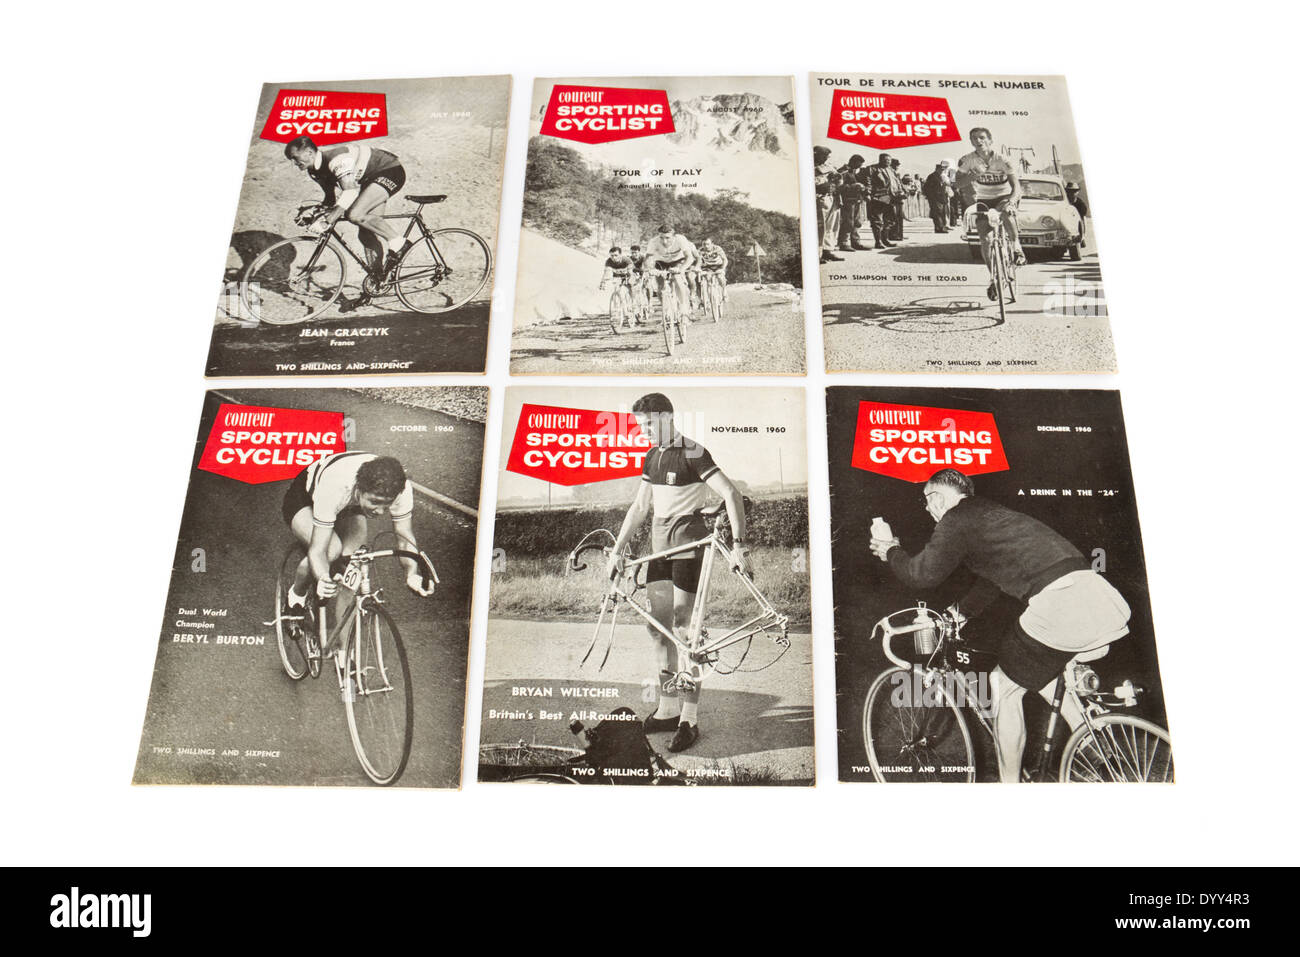 Selection of vintage 'Coureur Sporting Cyclist' magazines from 1960, including the Tour de France 'Special' from that year. Stock Photo